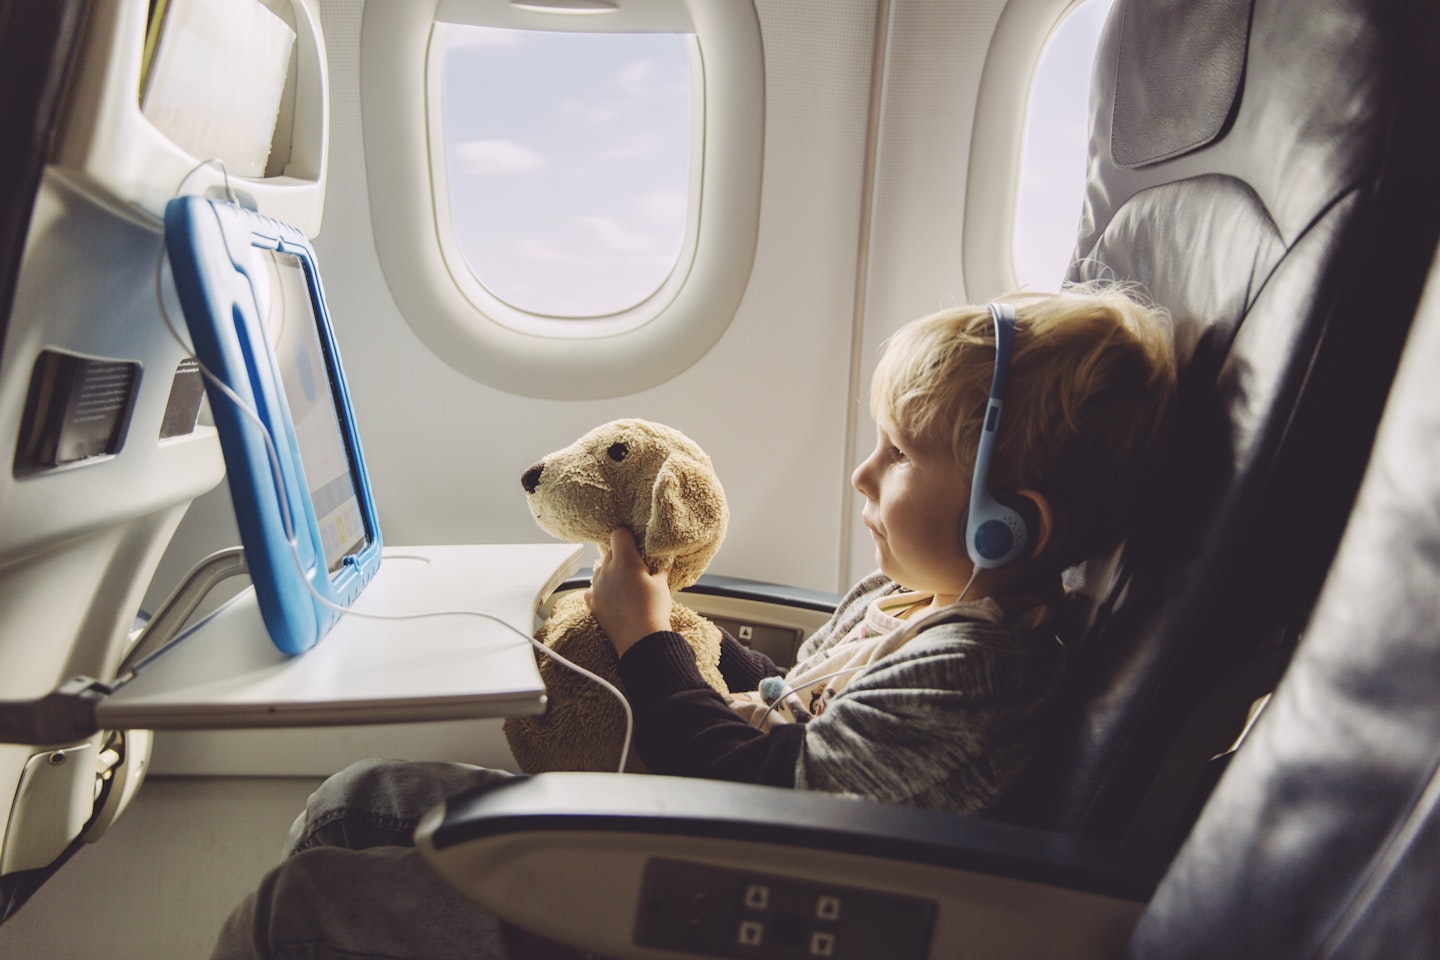 Toddler on a plane